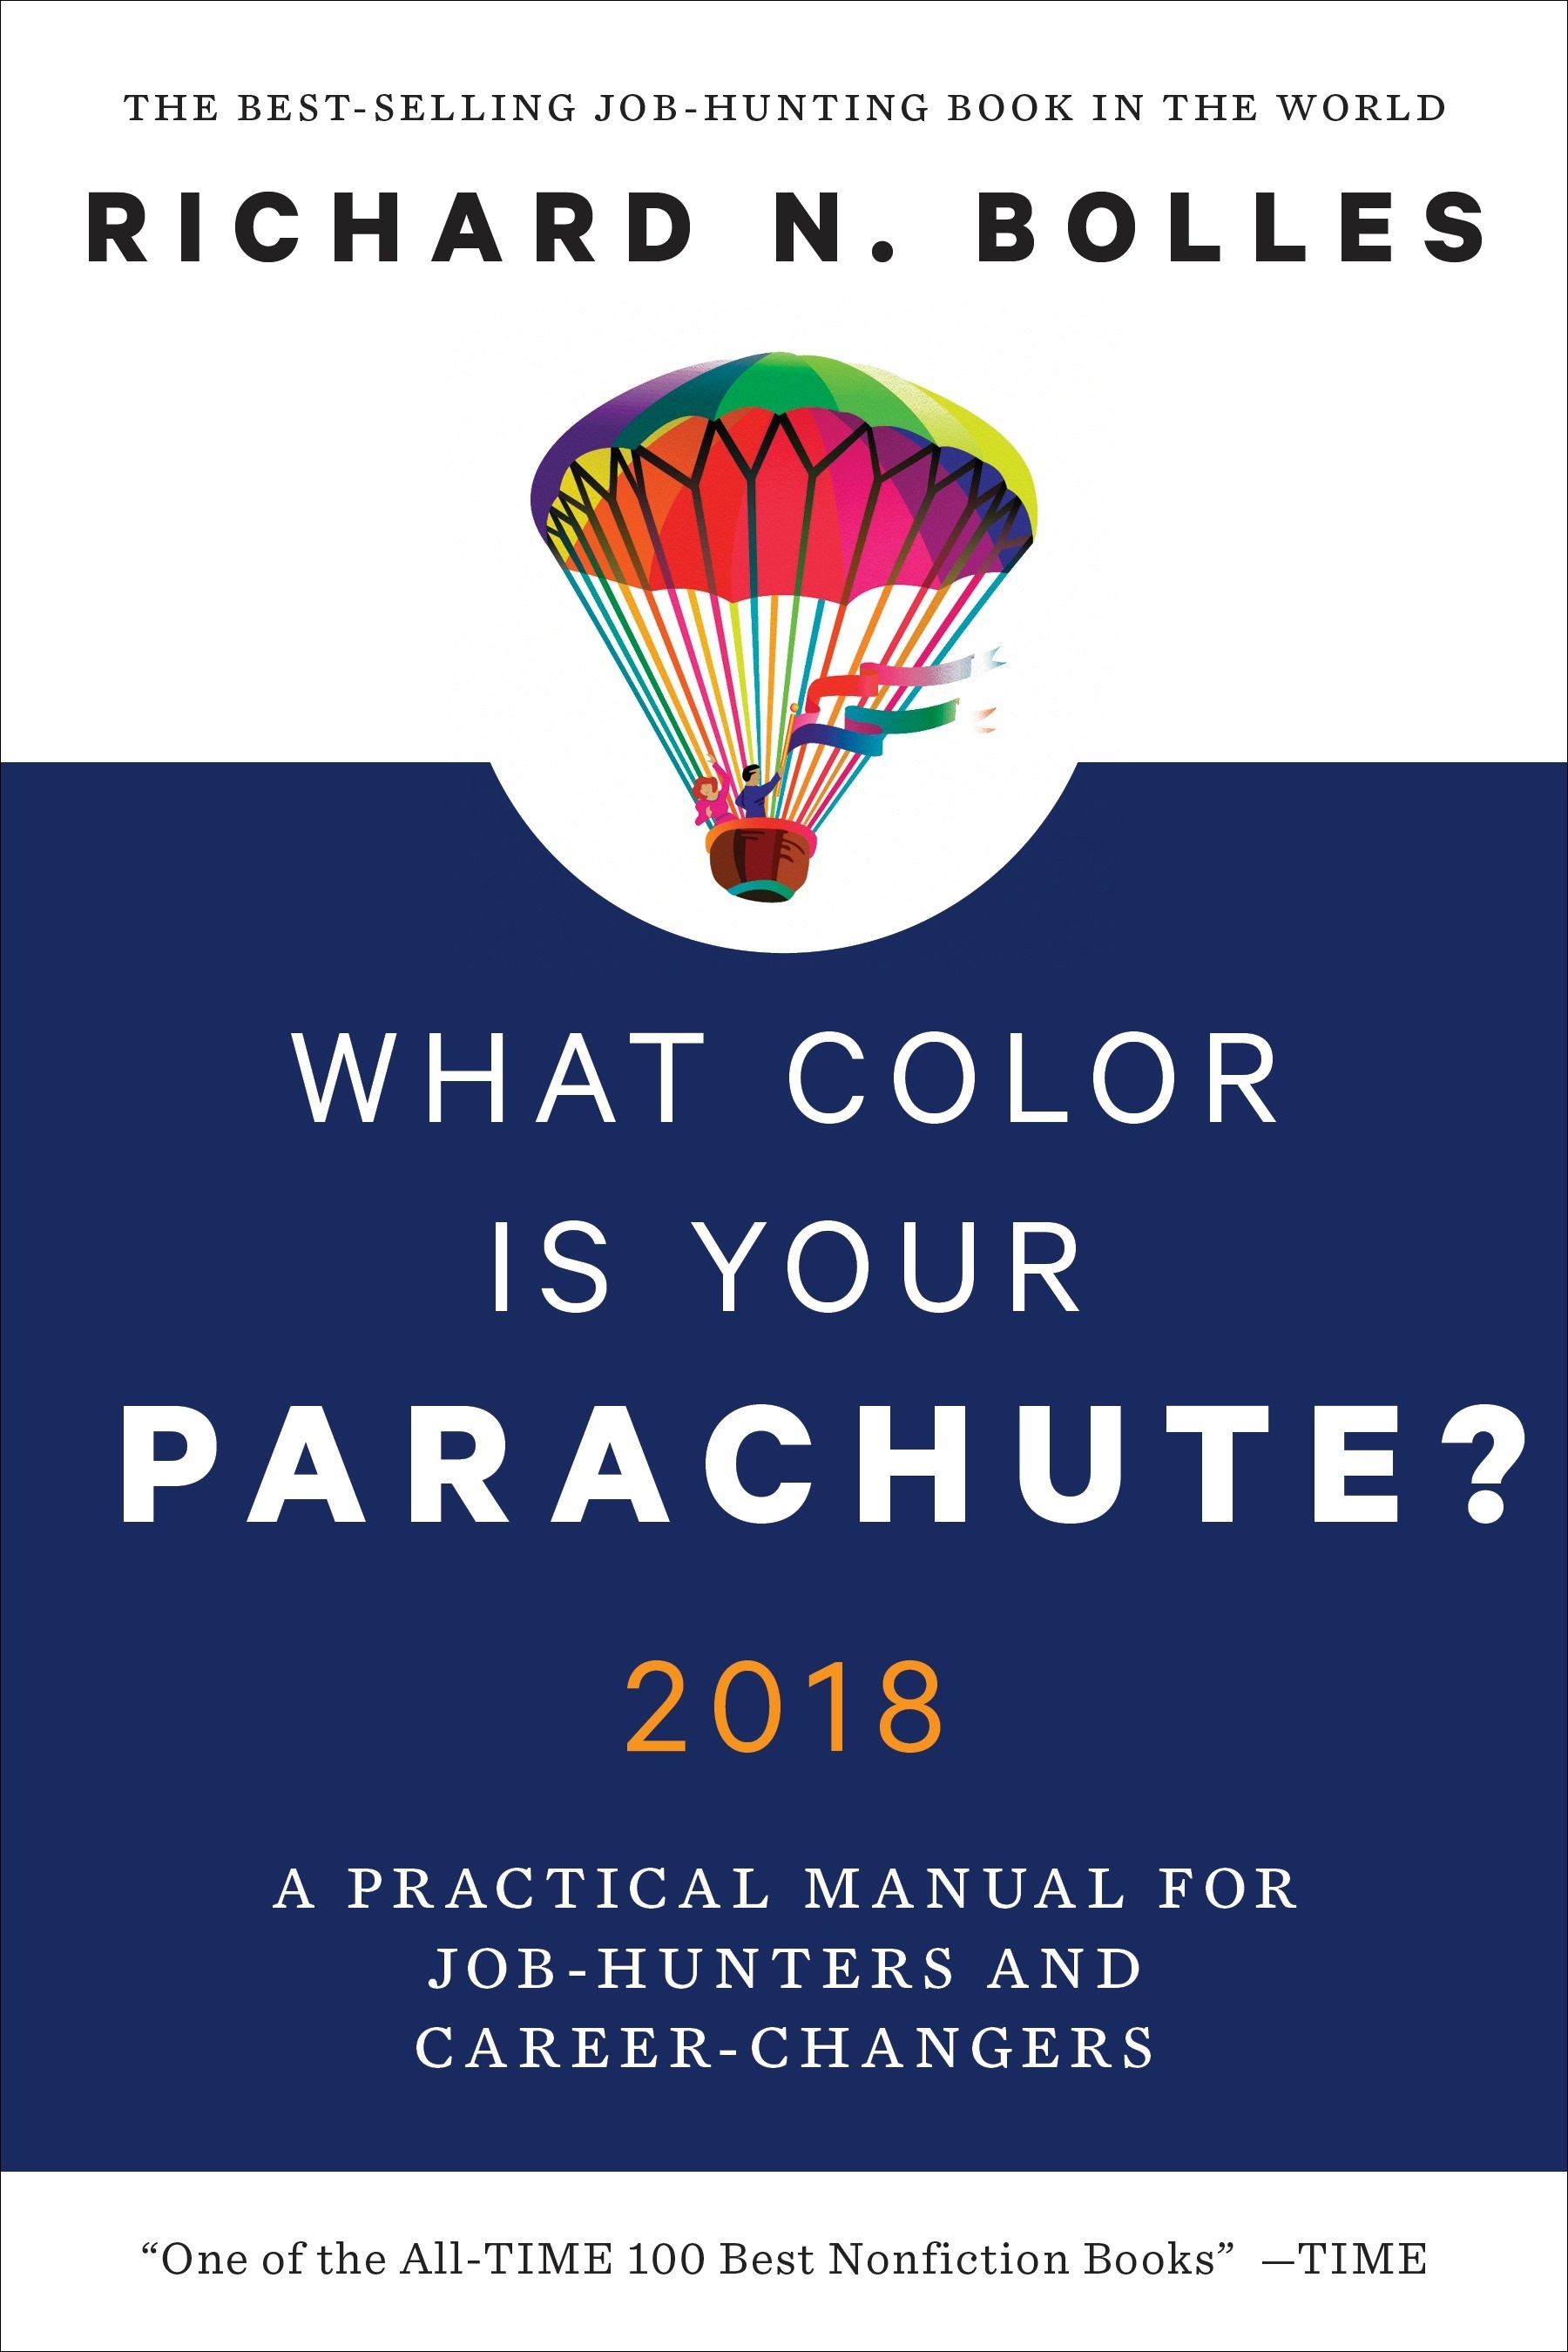 what color is your parachute richard bolles.jpg